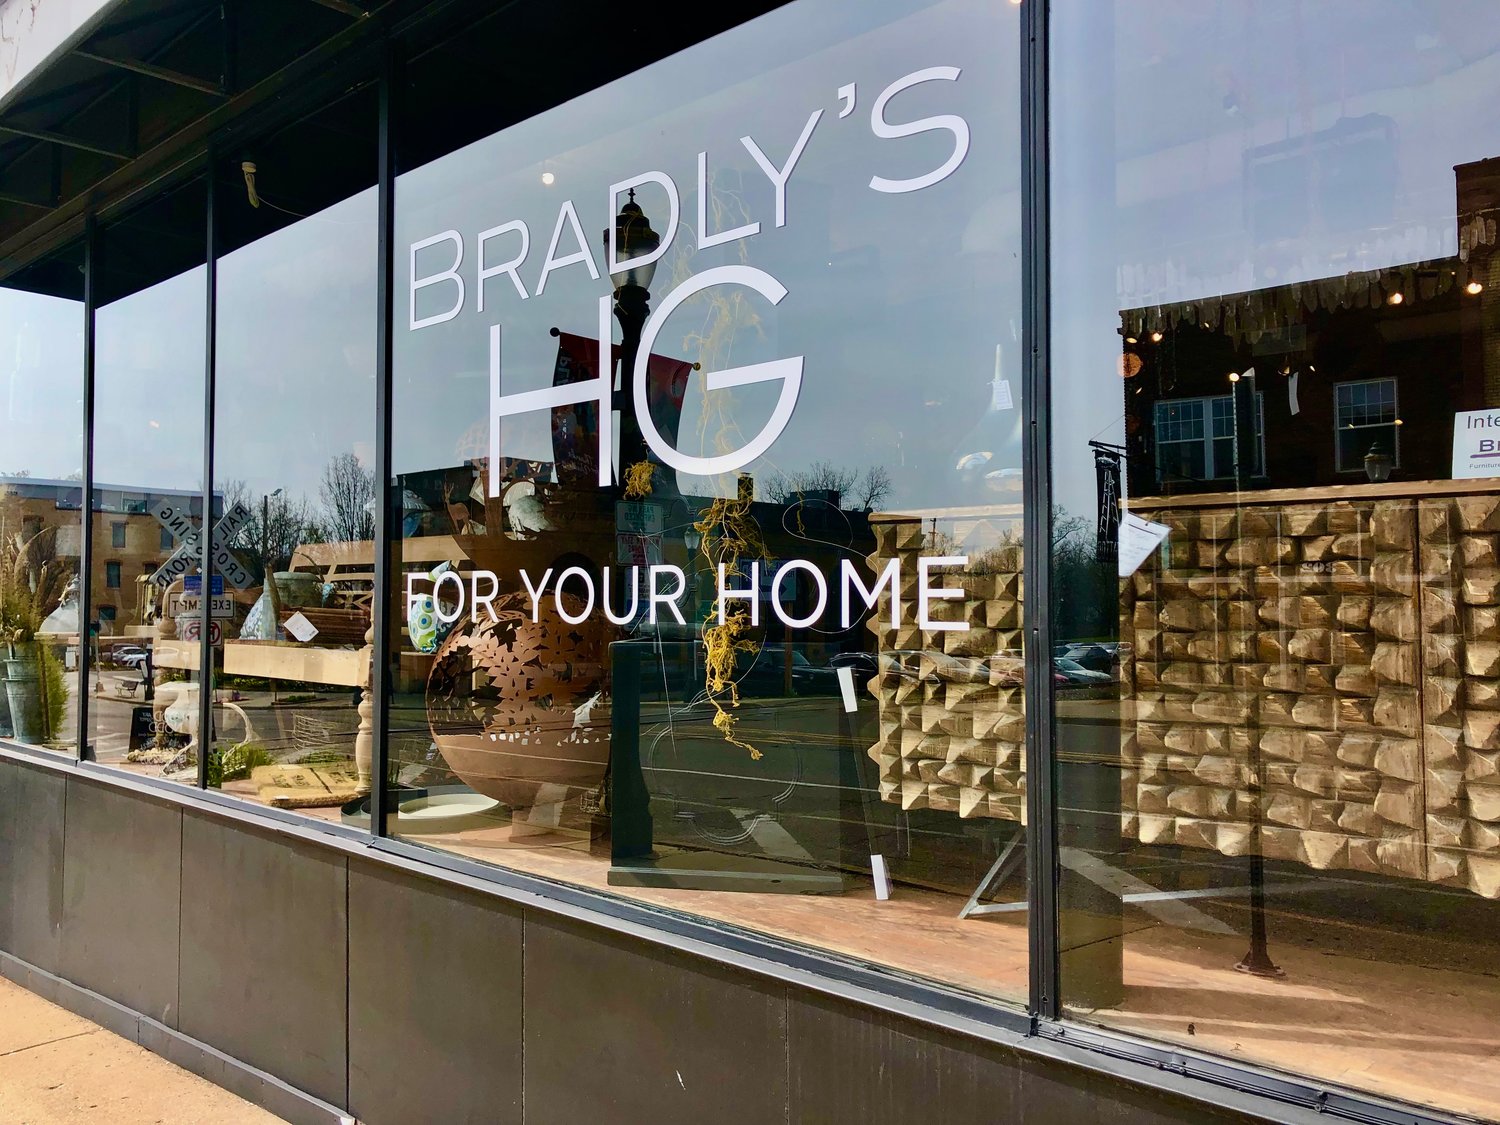 Bradly’s HG moved to a bigger storefront in Old Town.